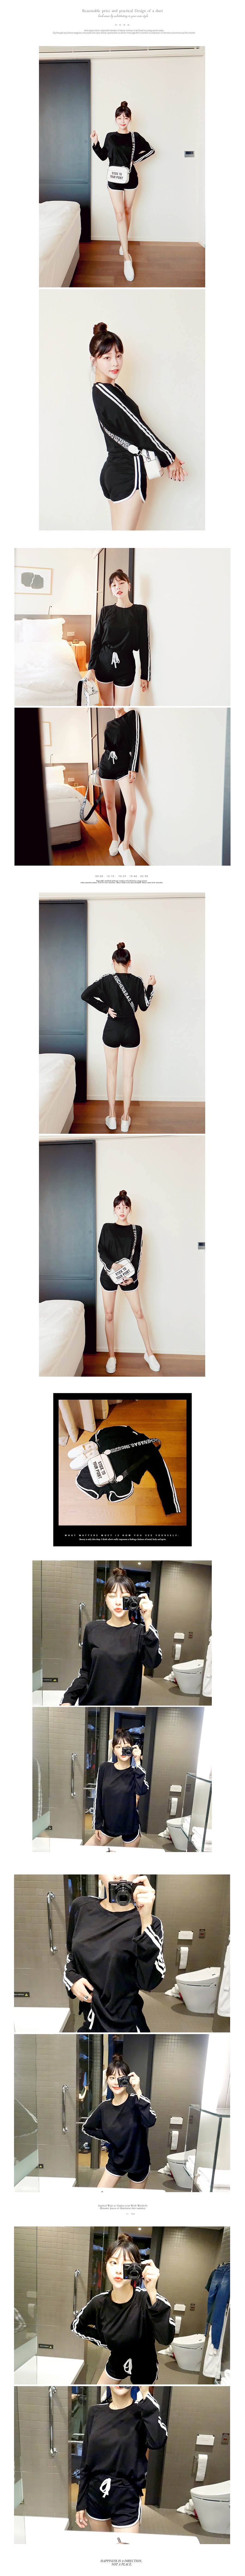 [Limited Quantity Sale] Black striped side T-shirt and shorts 2 pieces Set One Size(S-M)